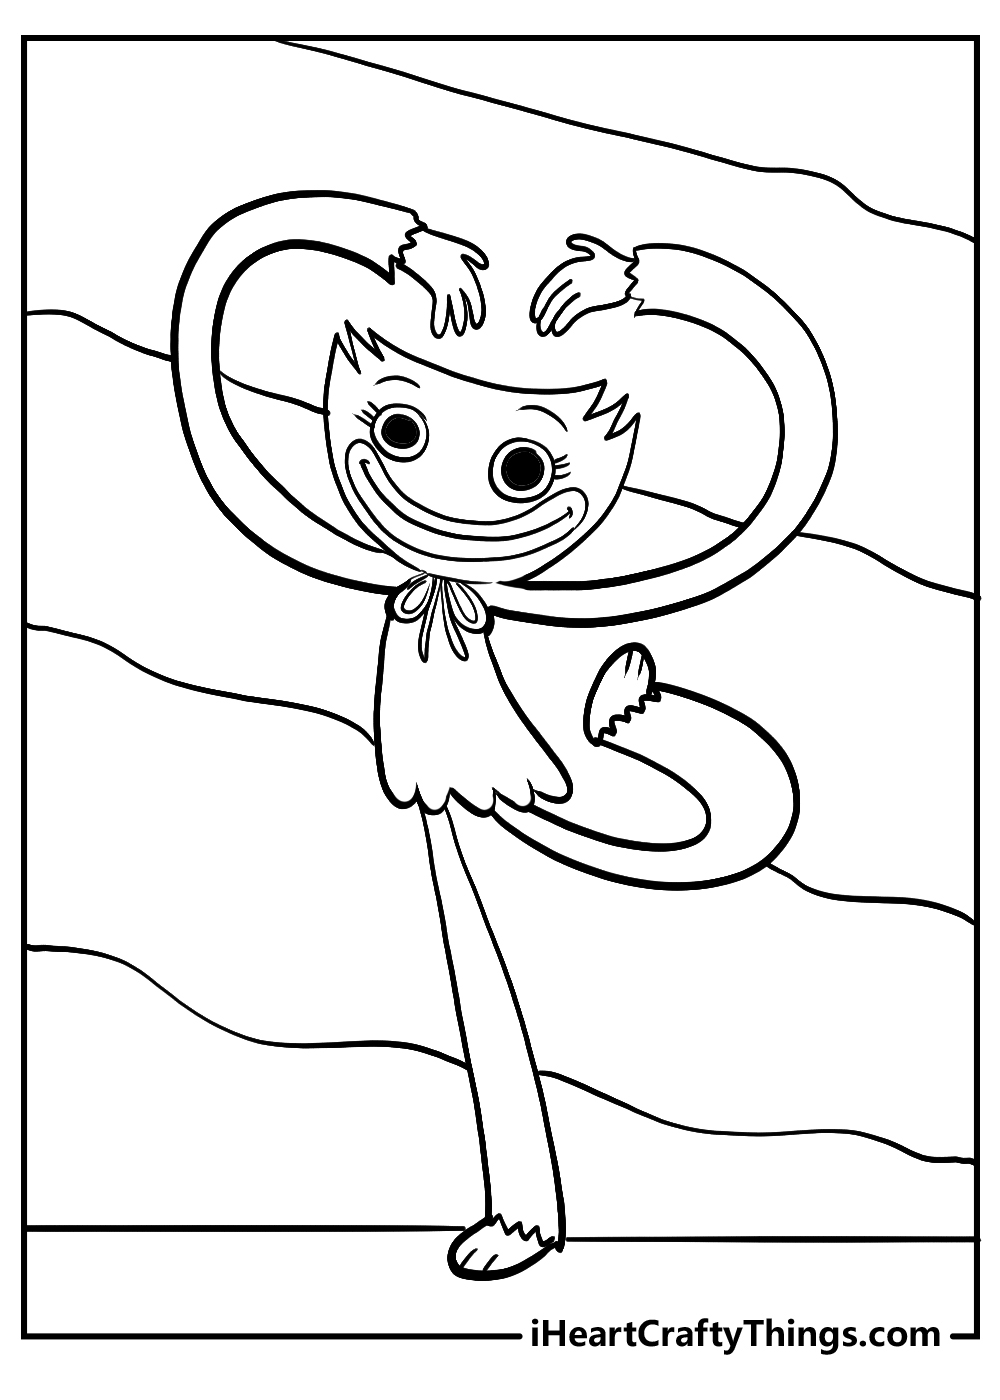 Pj Pug A Pillar Coloring Book For Kids: Scary Character